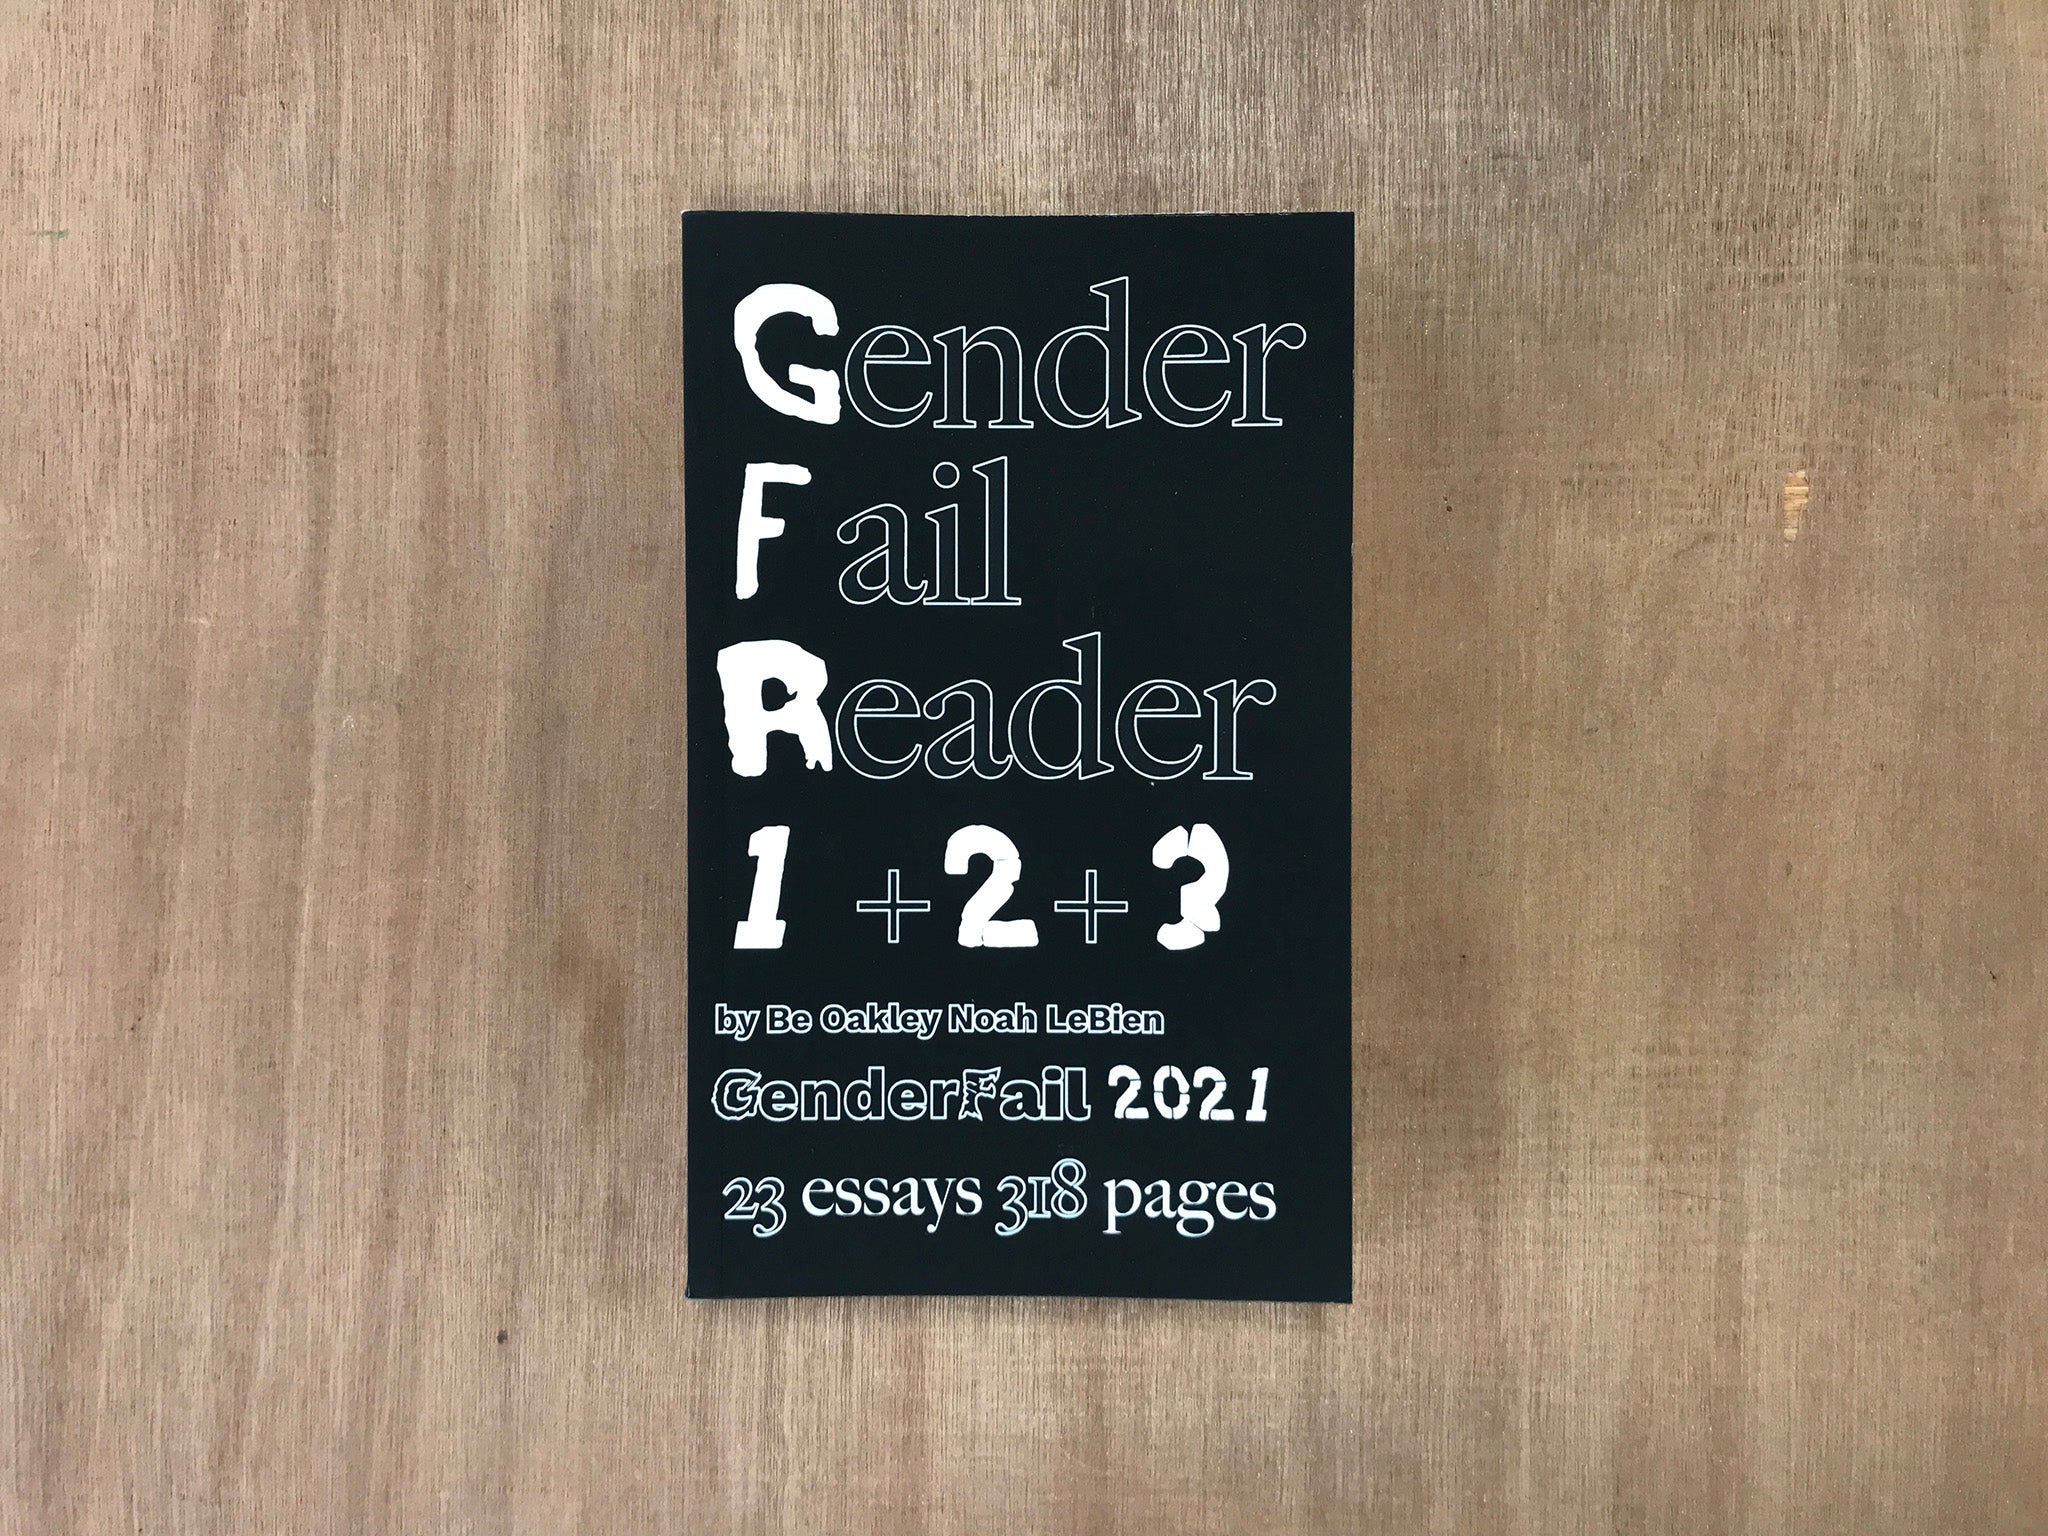 THE GENDERFAIL READER 1 + 2 + 3  ESSAYS by Be Oakley and Yvonne LeBien